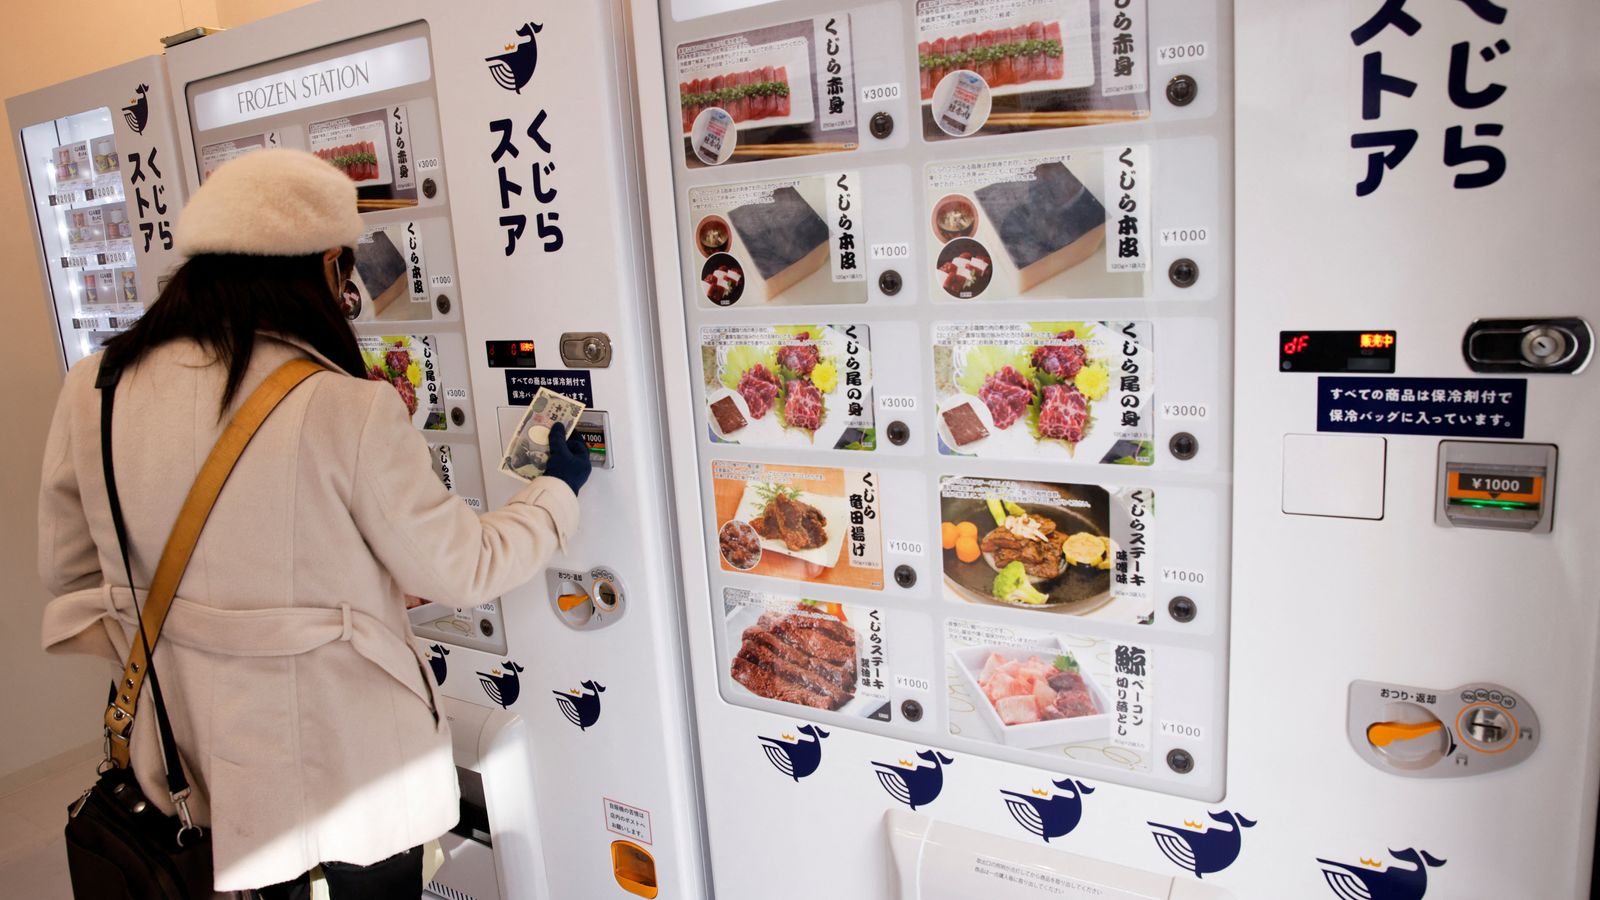 Japan: Whale meat sold in vending machines as campaigners criticise decision | World News